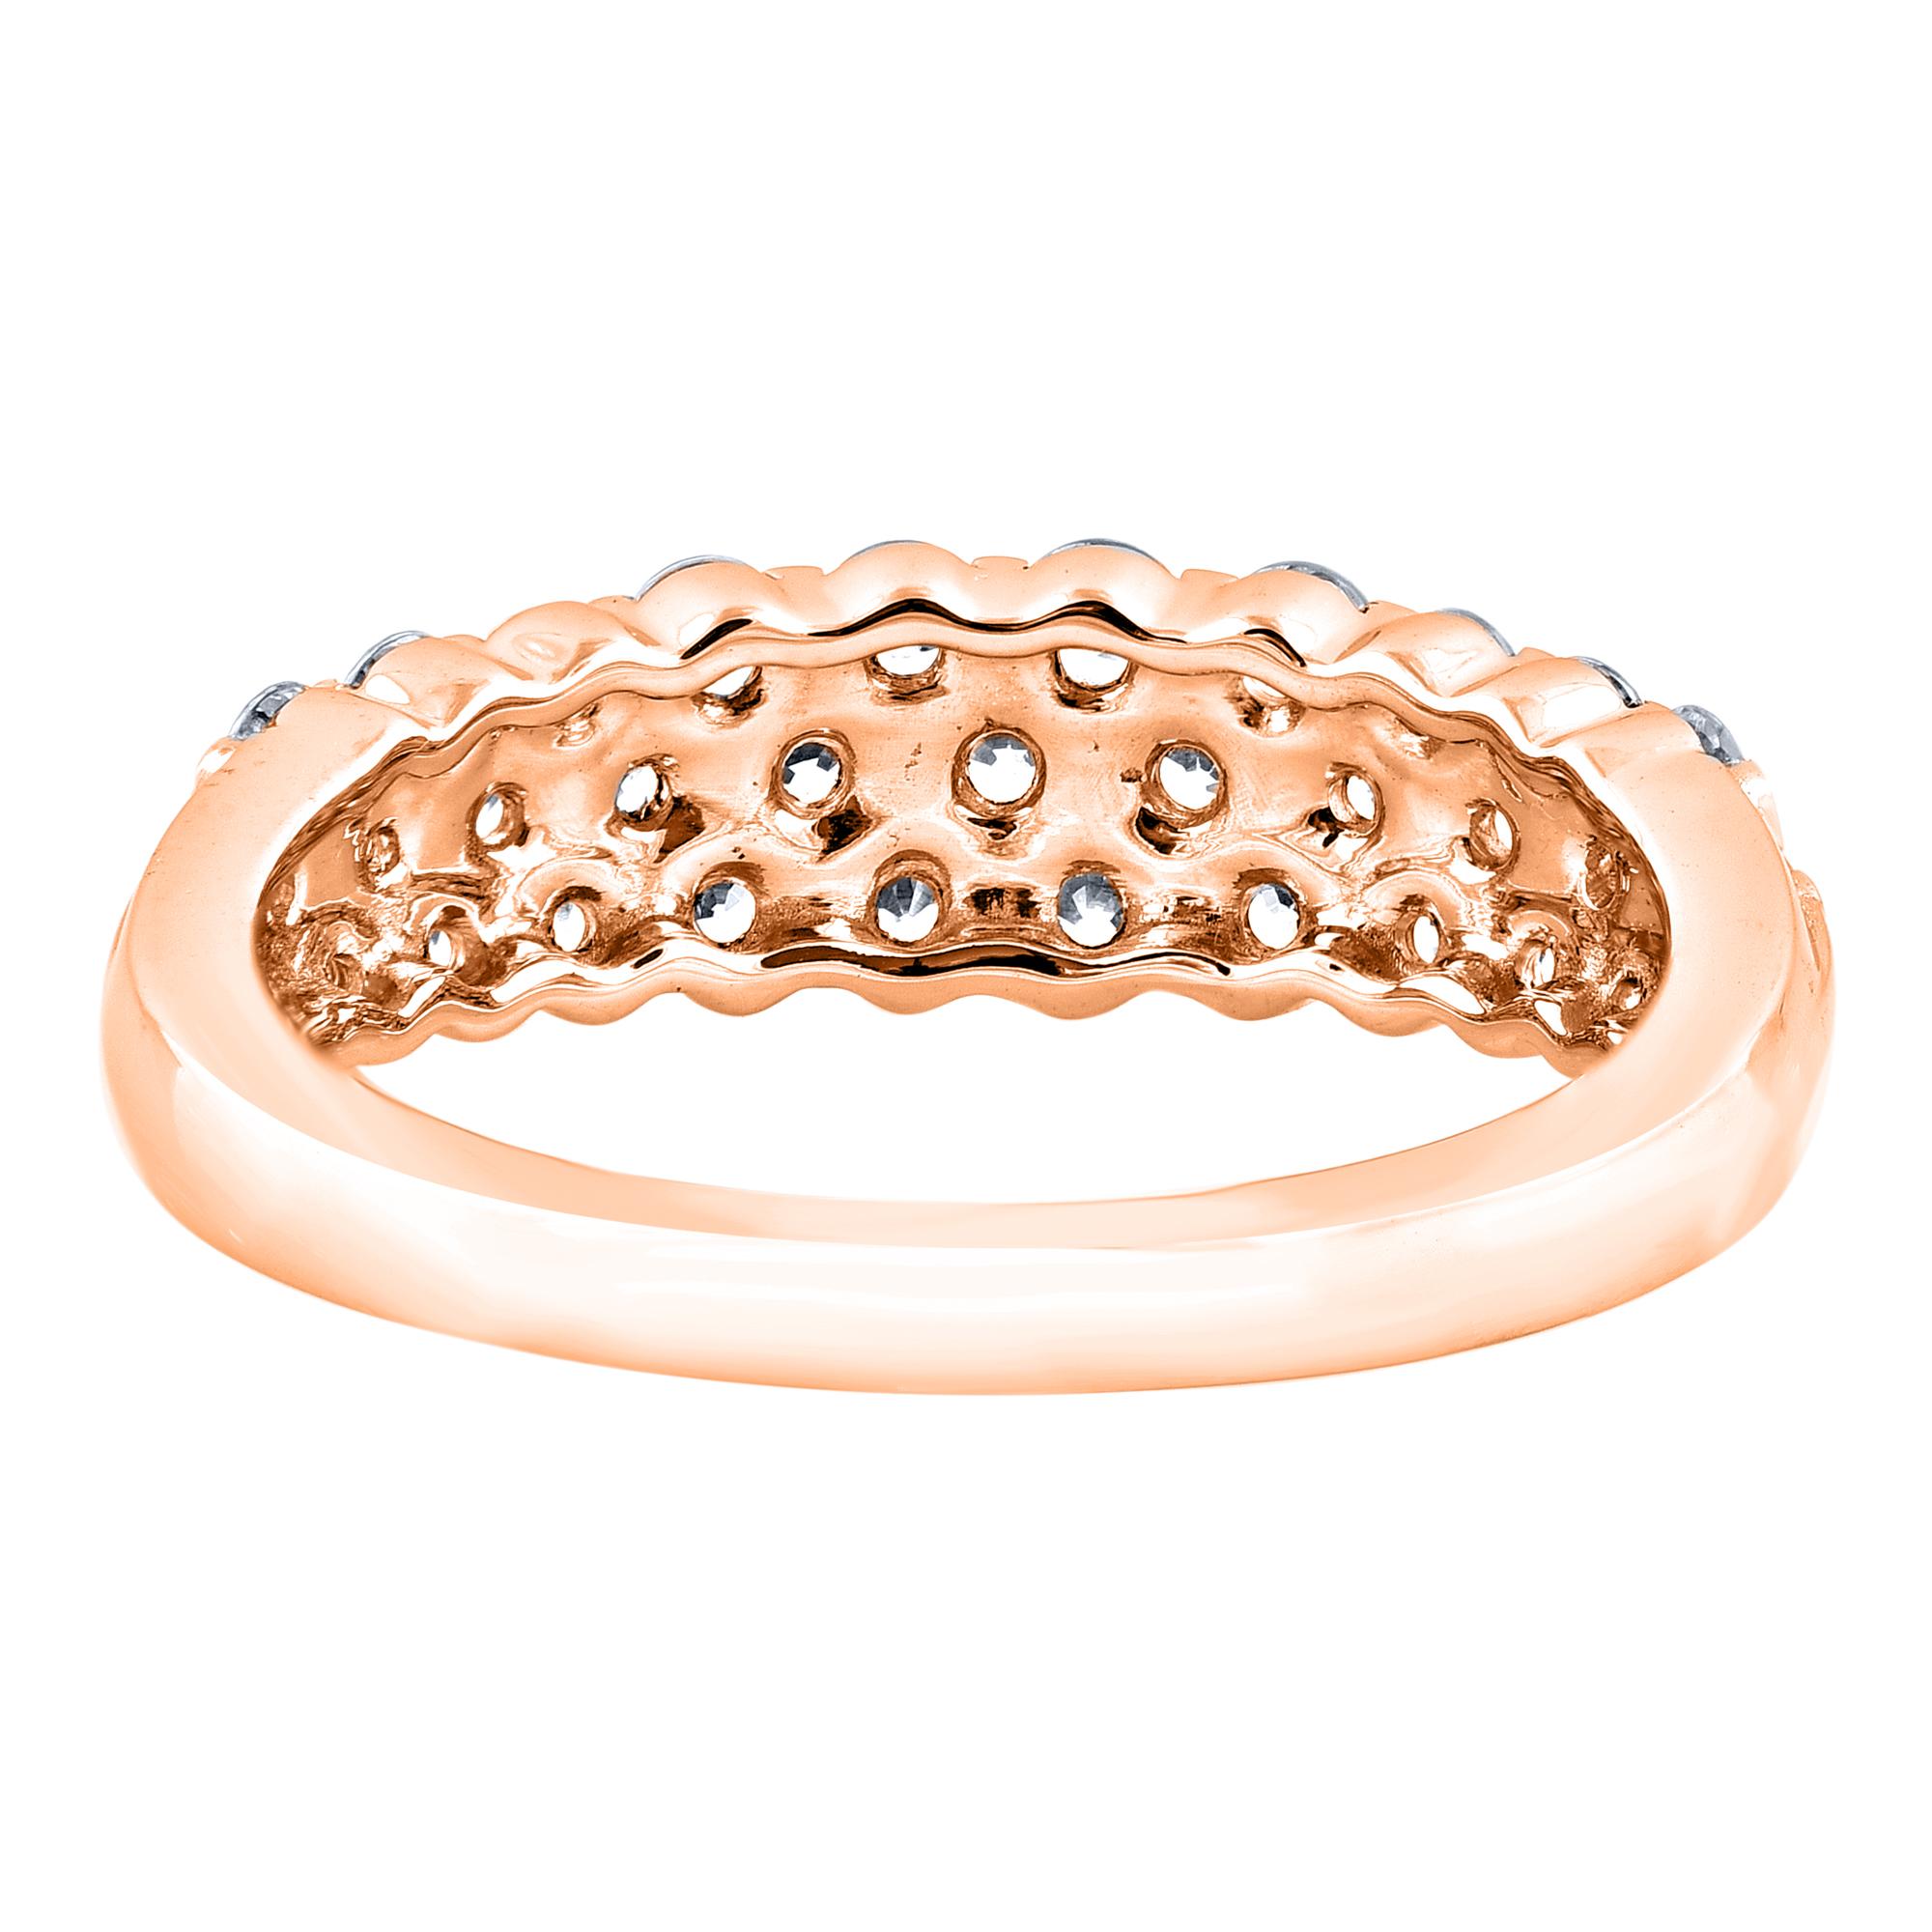 Contemporary TJD 1.0 Carat Brilliant Cut Diamond 14KT Rose Gold Three Row Wedding Band Ring For Sale